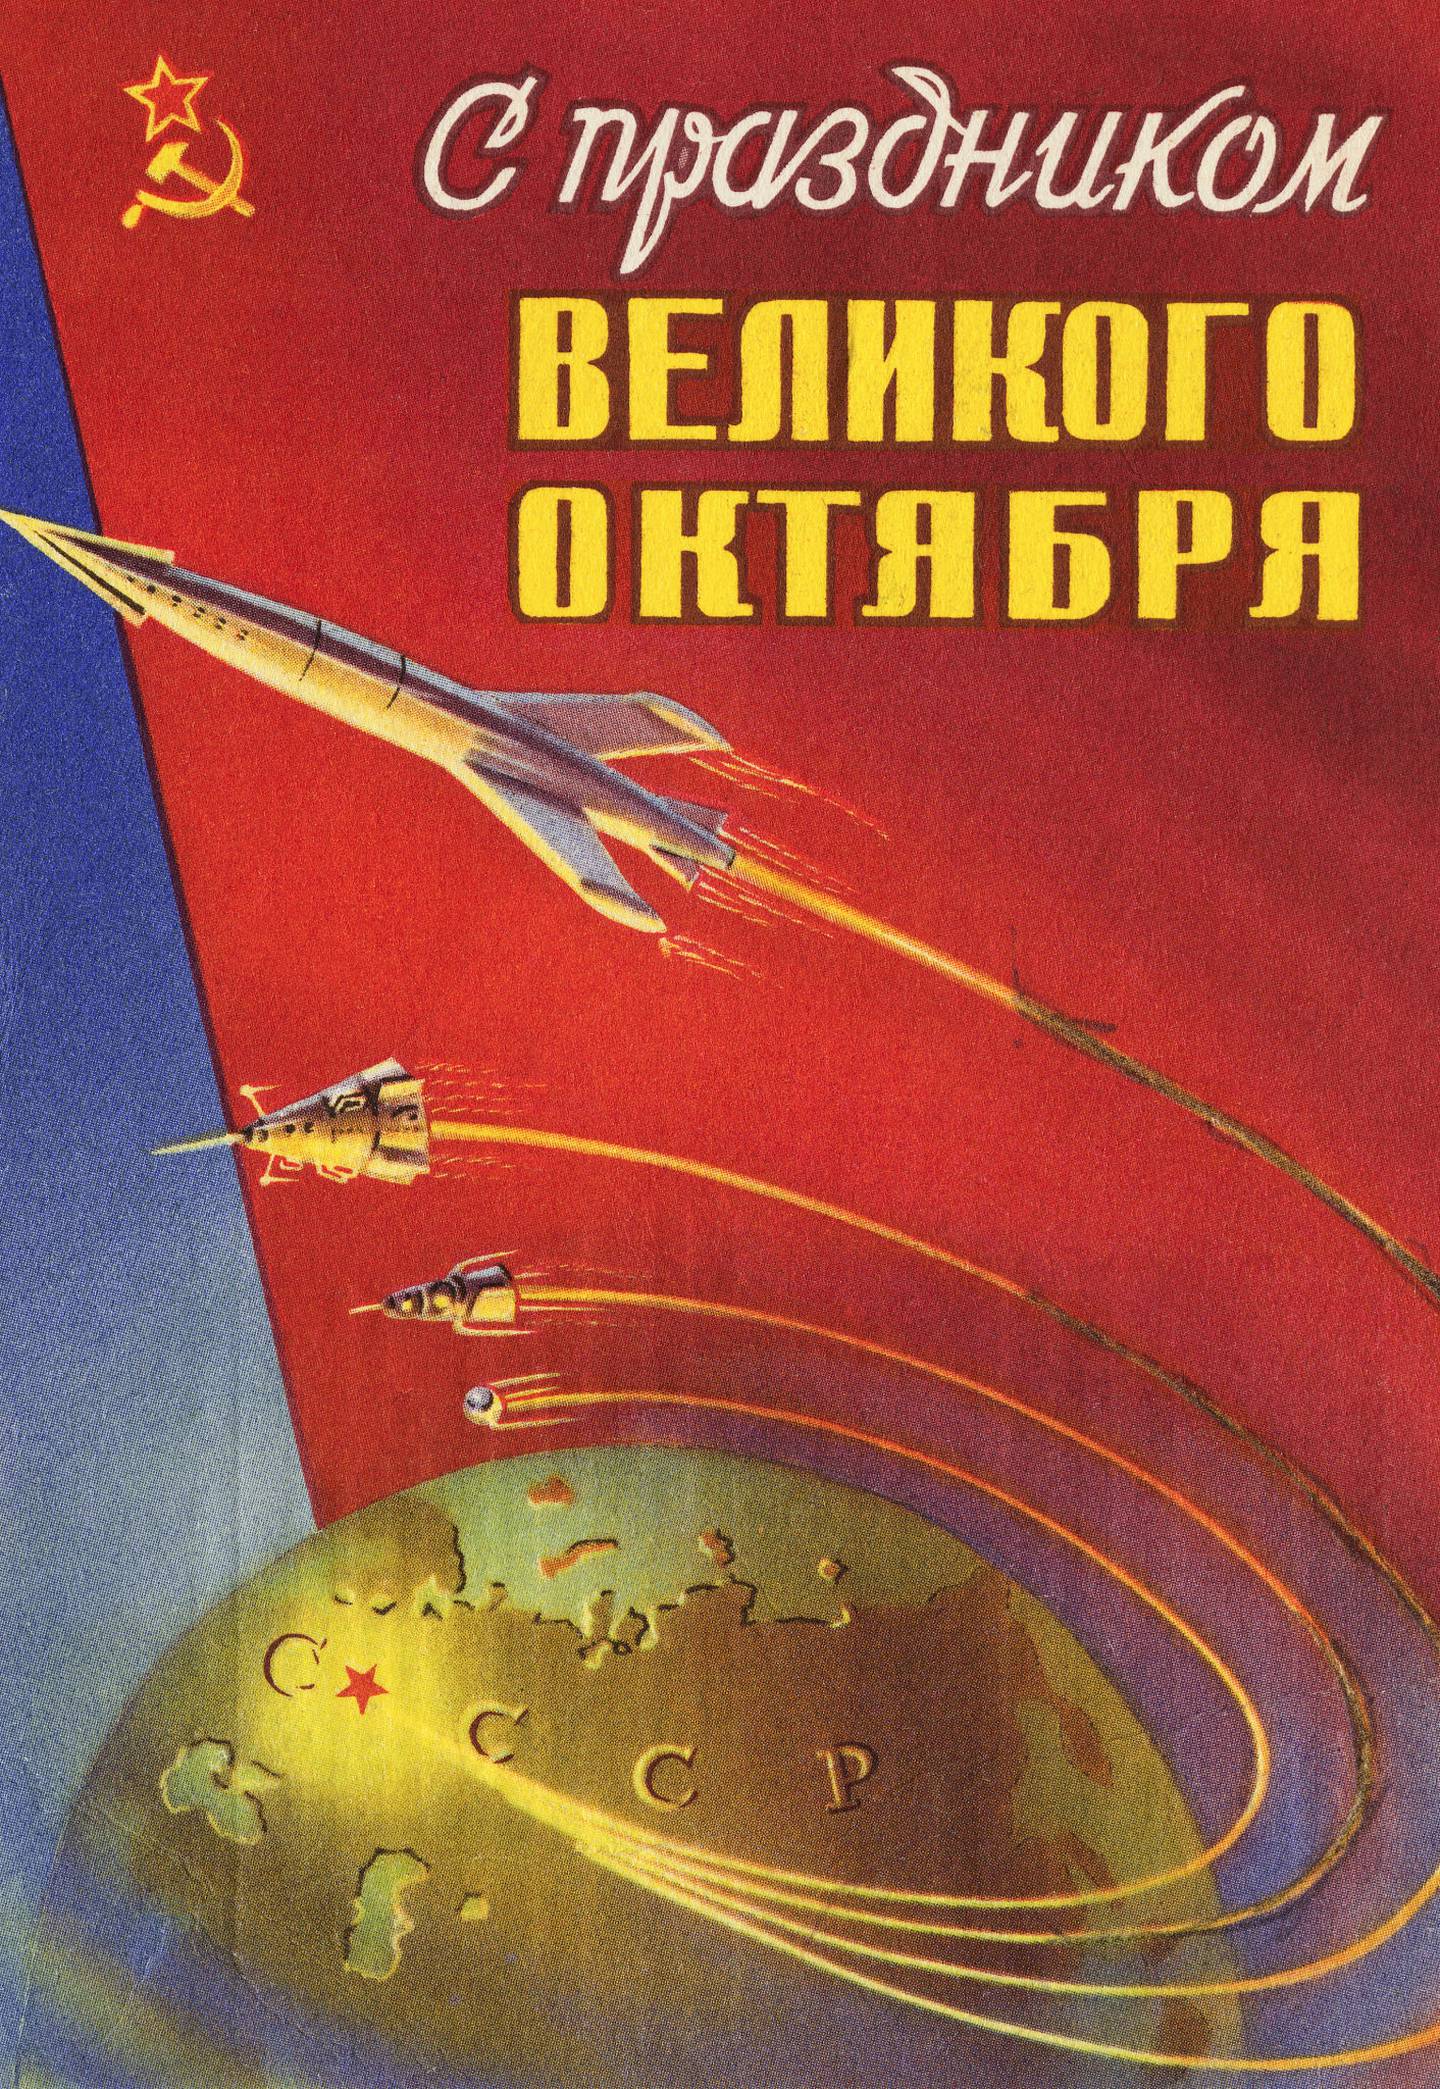 1959 poster about the space race from the Soviet Union.